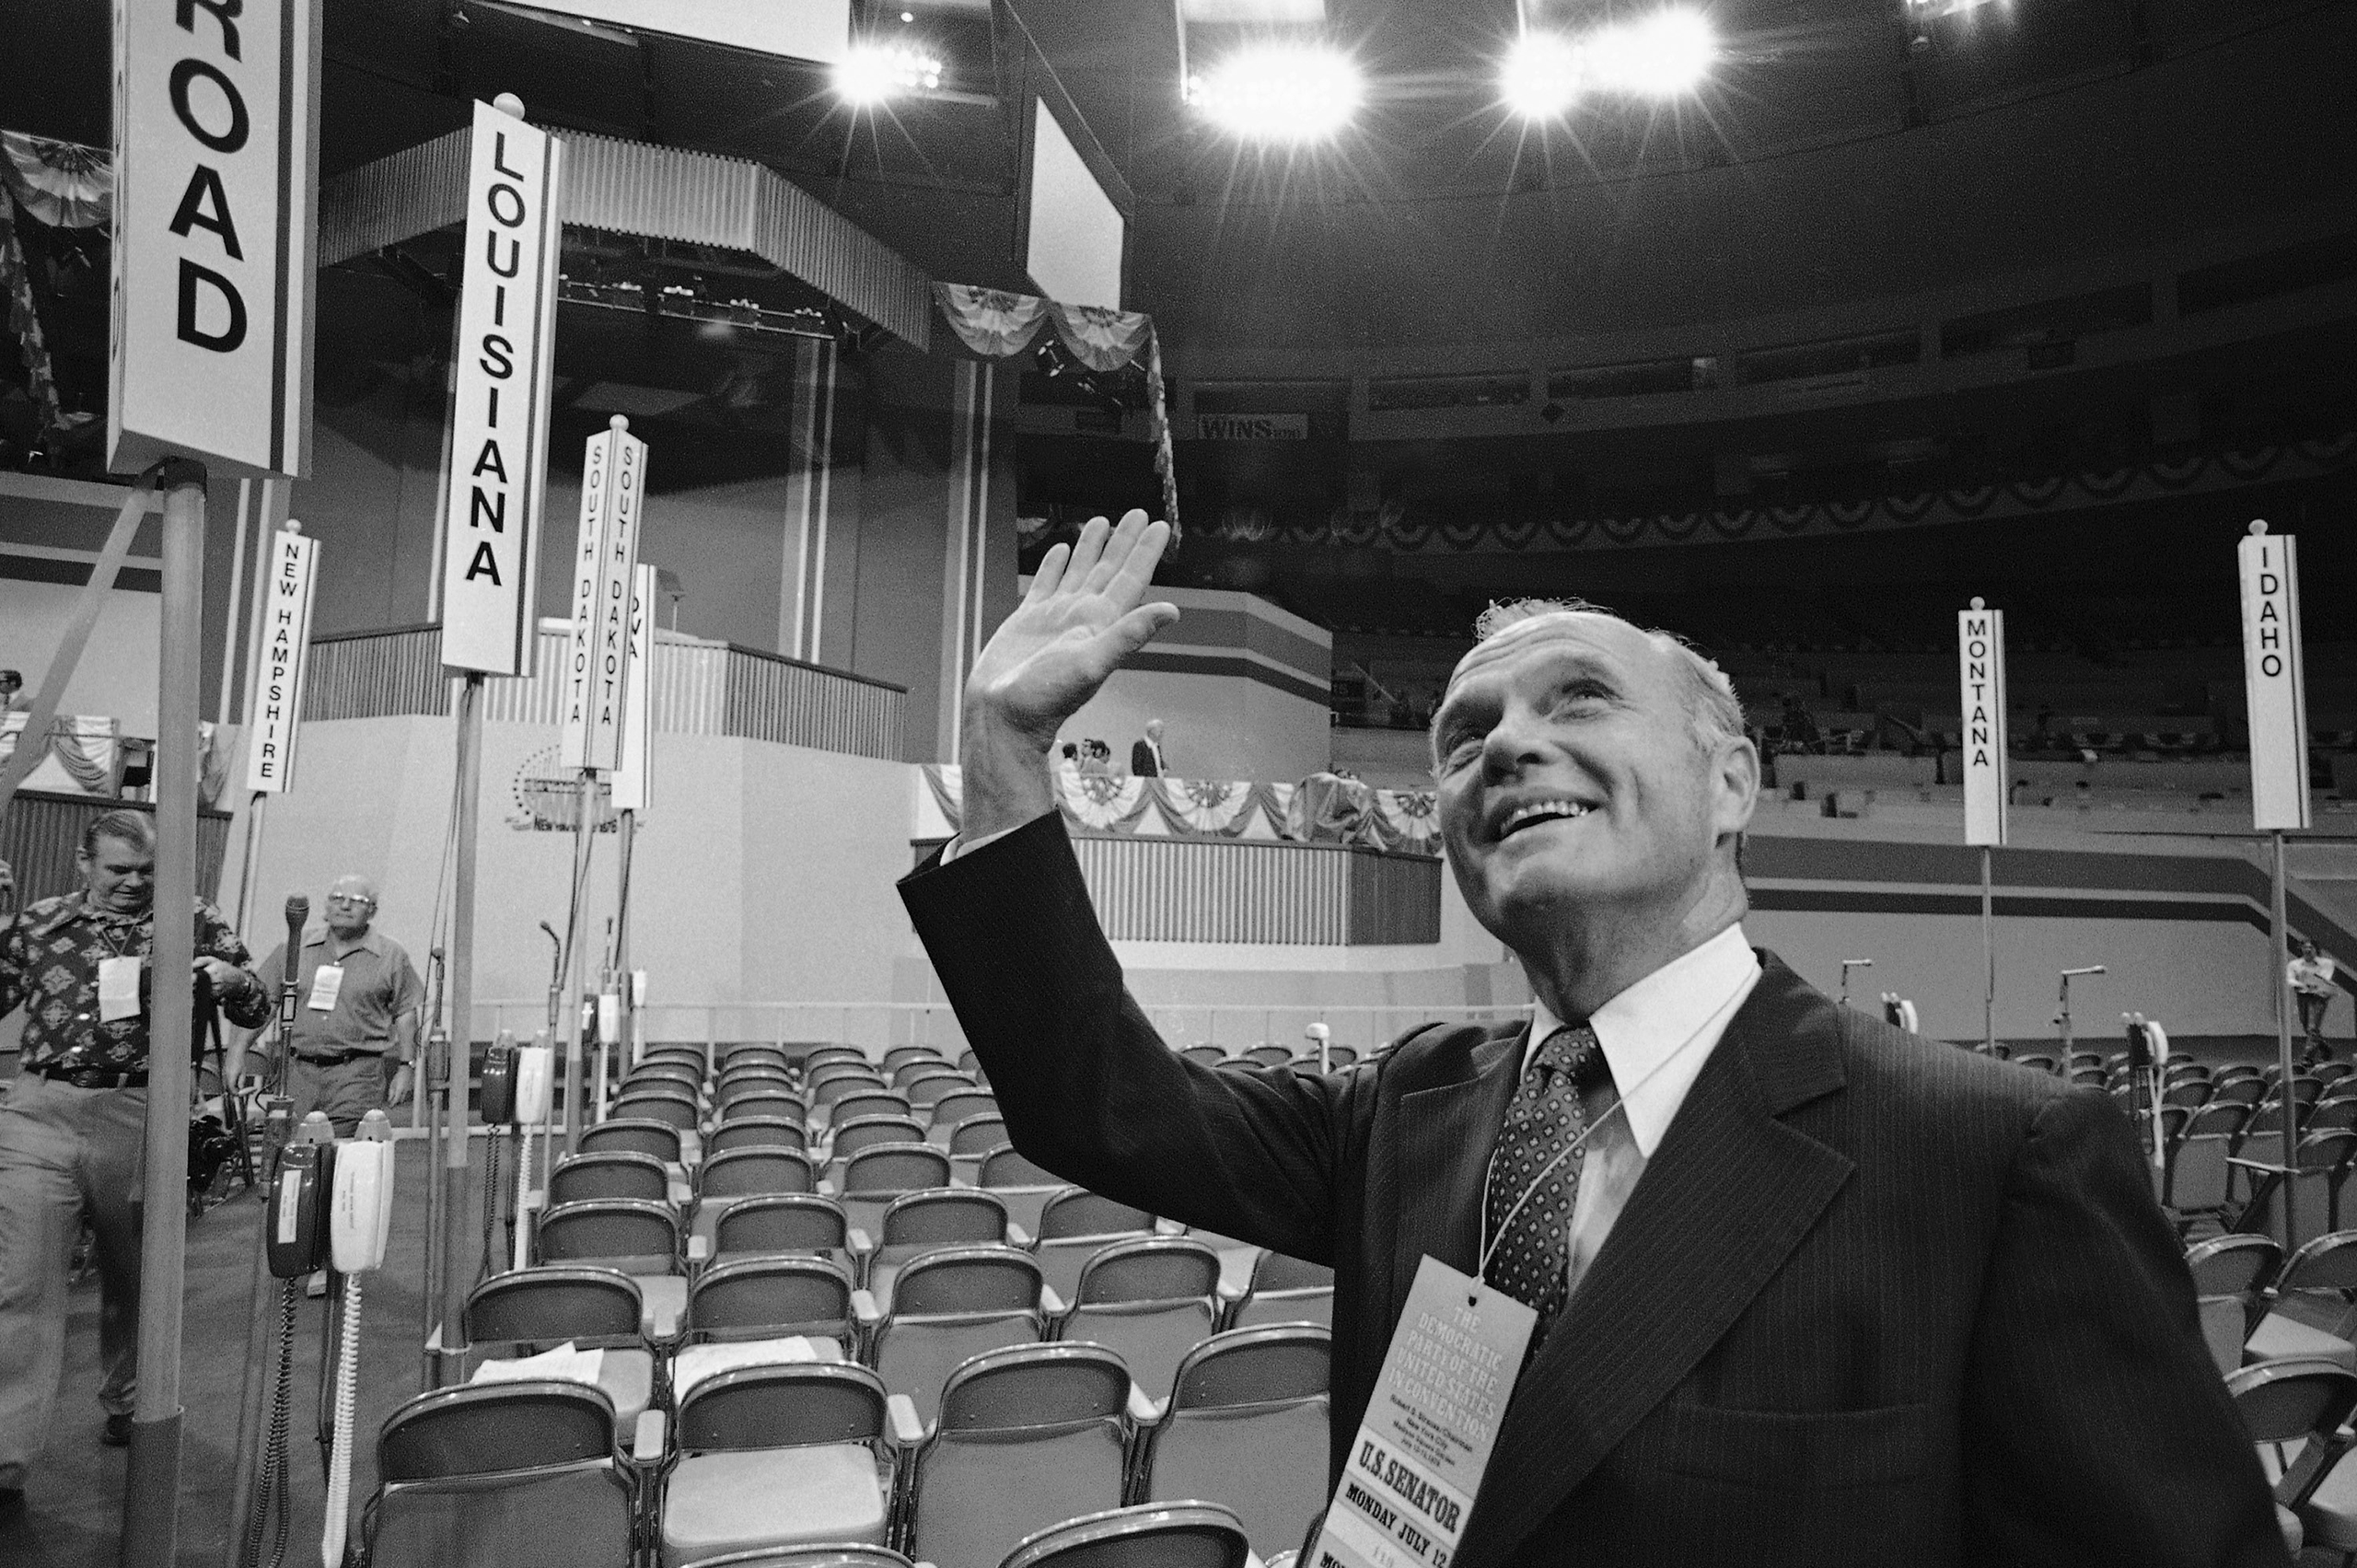 A Political High
                              At a soon-to-be packed Madison Square Garden in New York City in 1976, Glenn waves to a supporter before his keynote address to the Democratic convention.